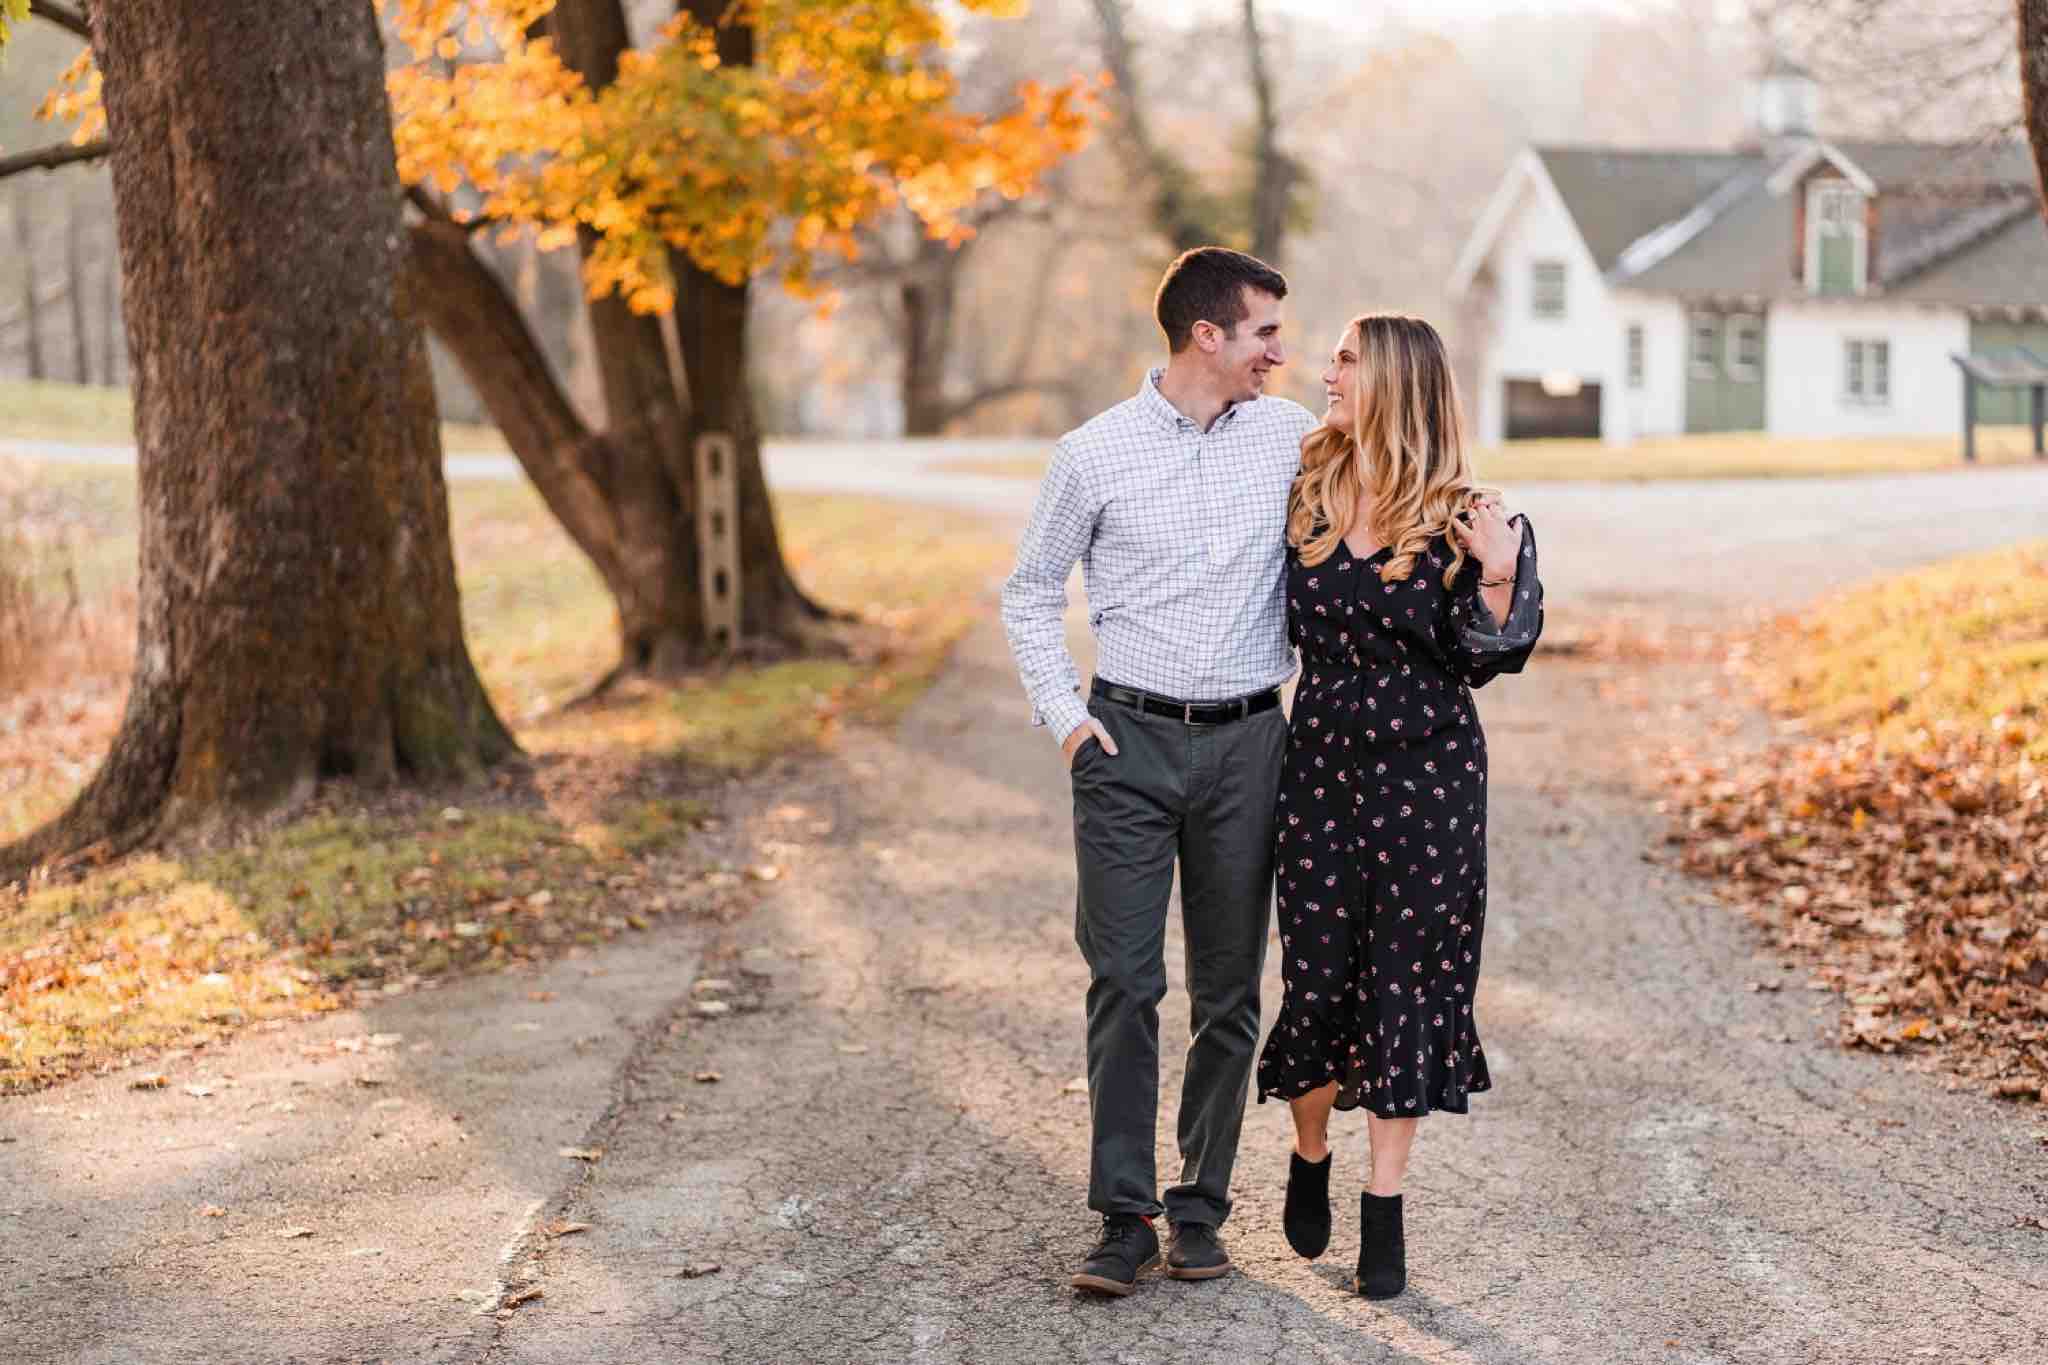 Ryan & Ali Engagement in Valley Forge Park Photos